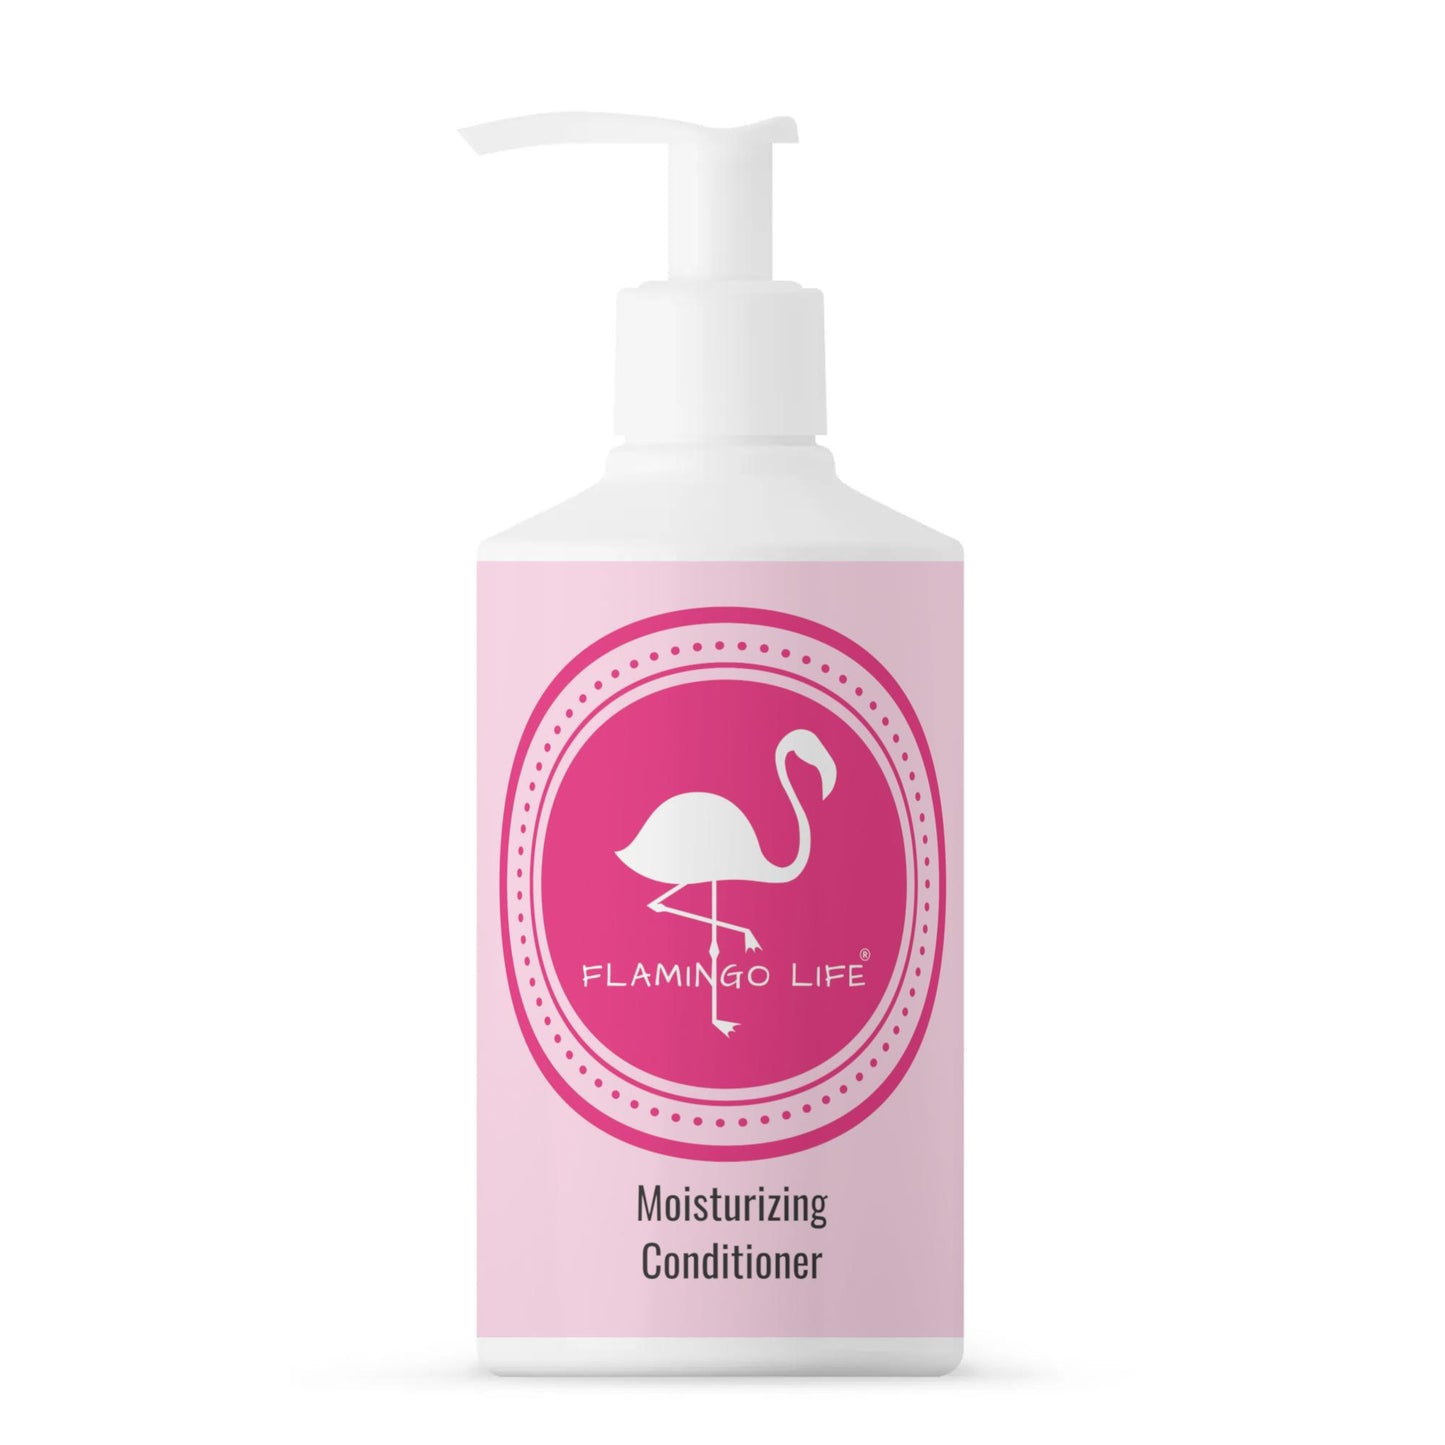 Flamingo Life® Moisturizing Conditioner with Argan Oil and Wheat protein